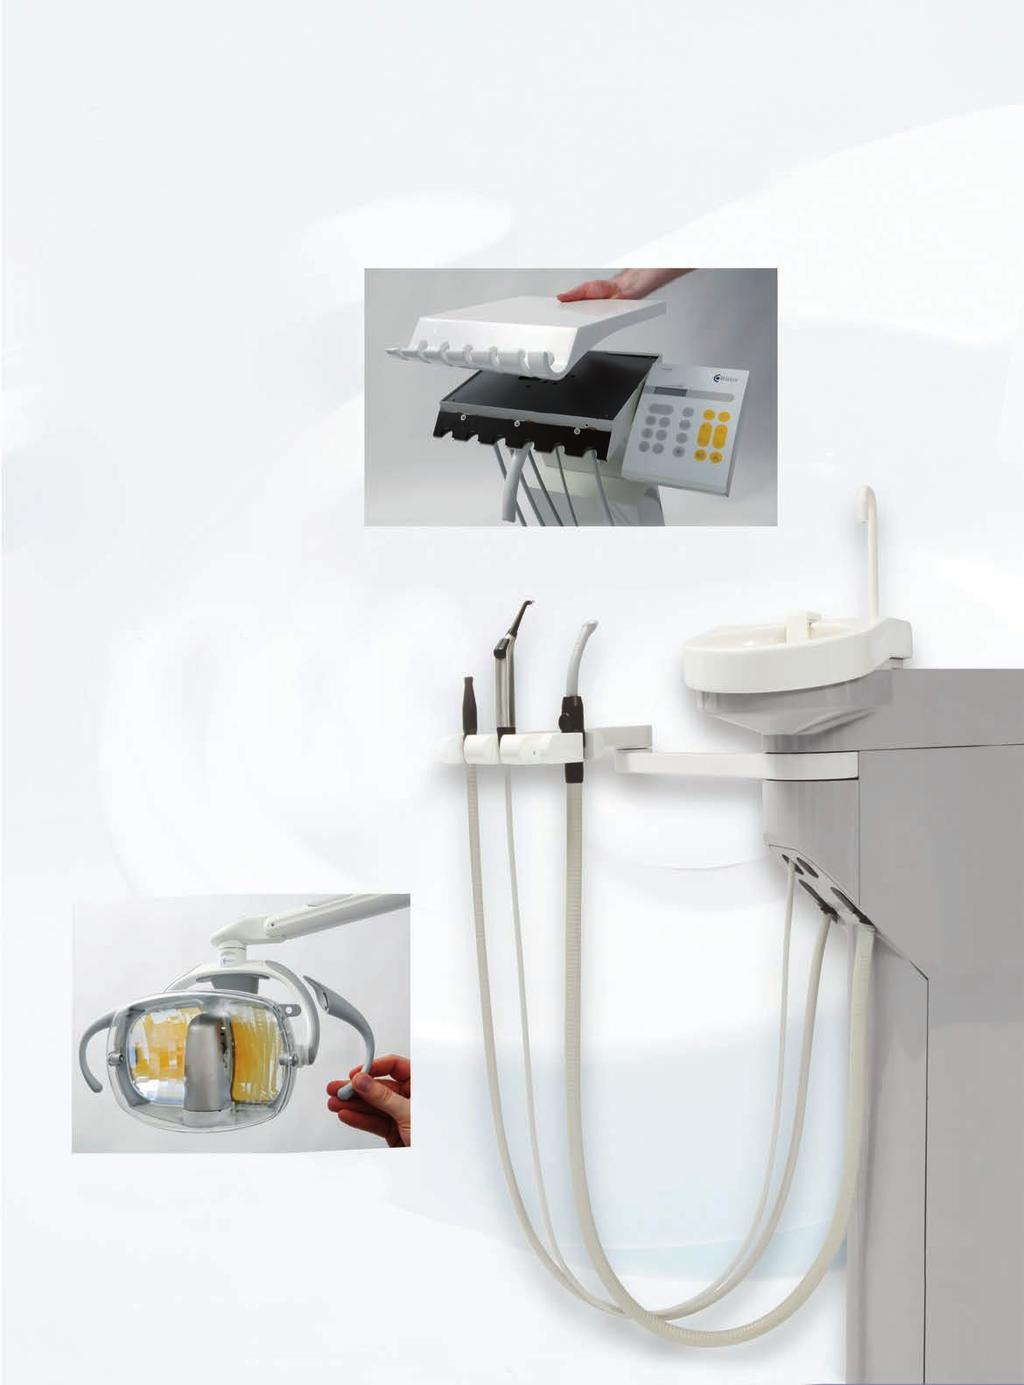 Safety First Ritter Contact Line systems are designed for quick and effective infection control.